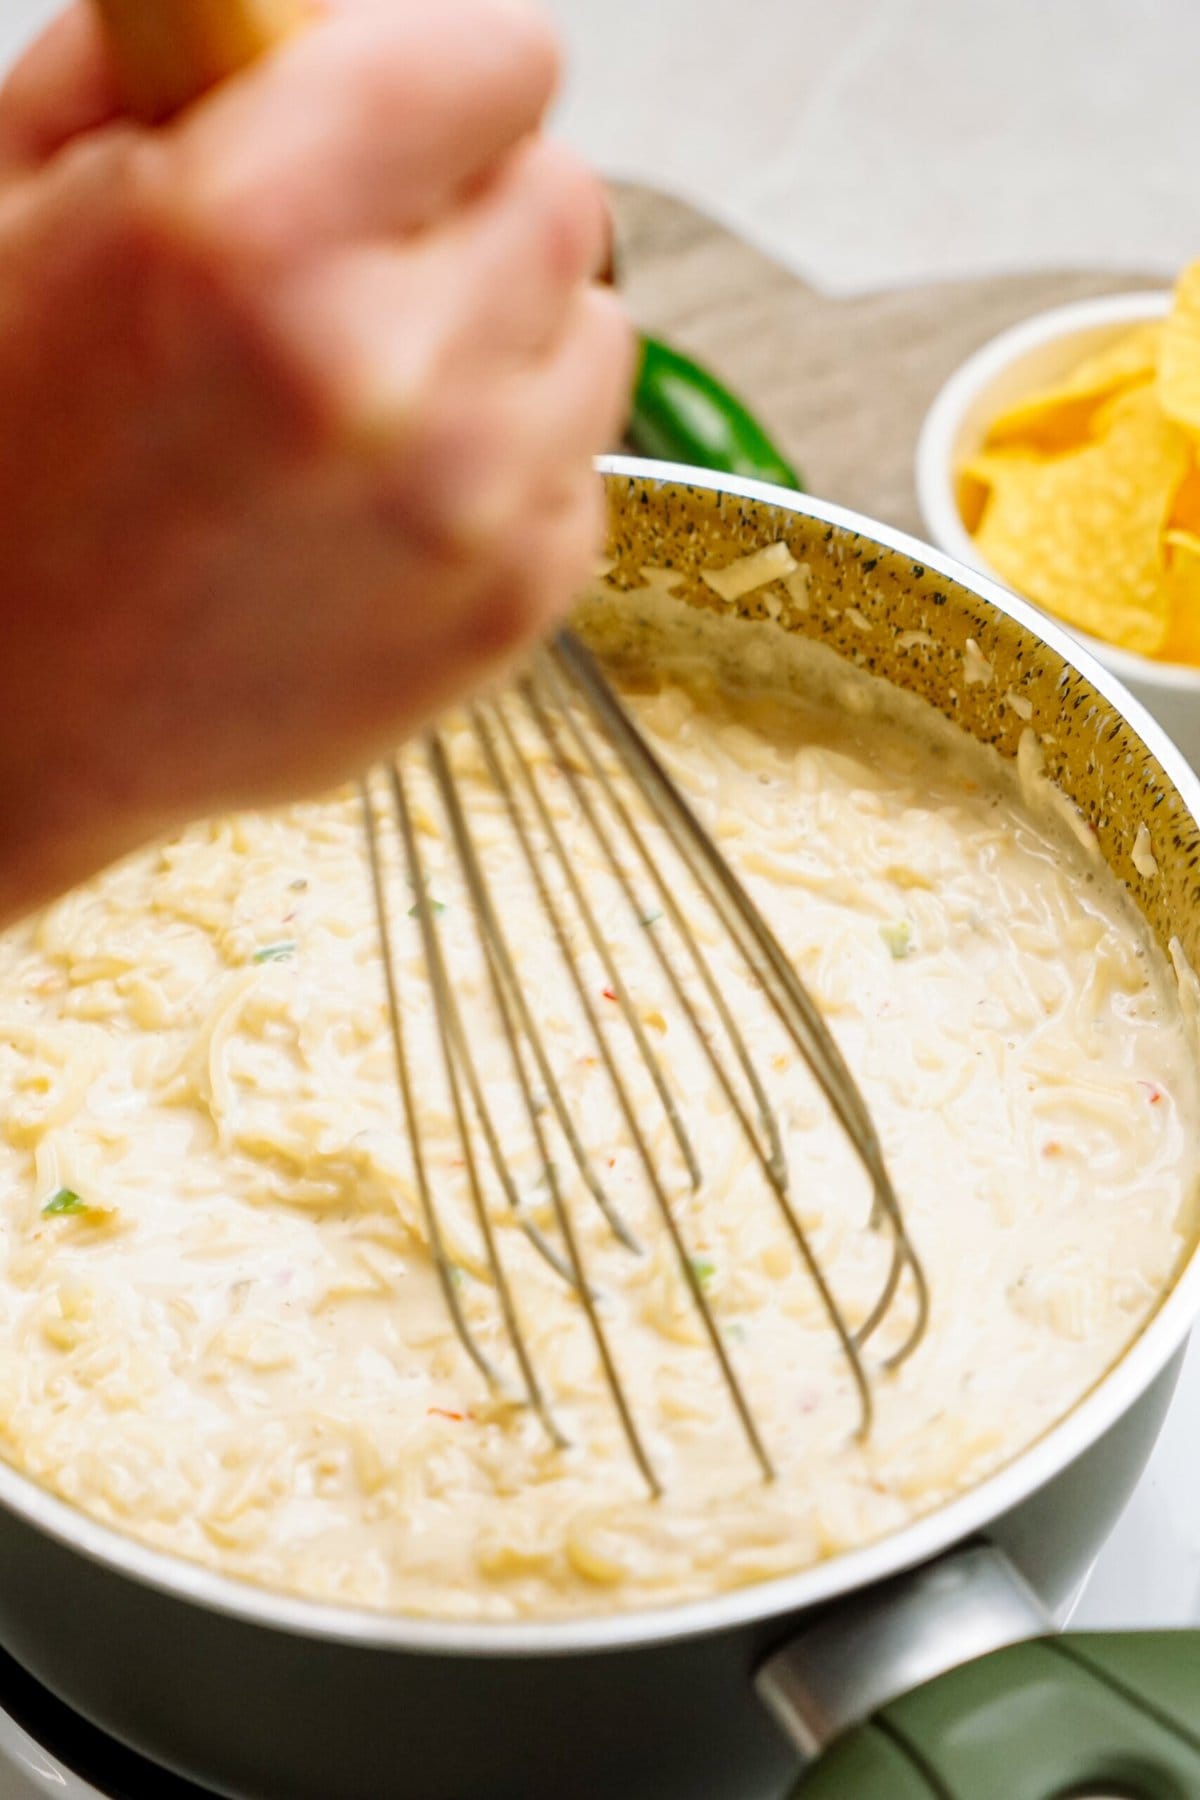 A hand is whisking creamy white sauce in a pot on the stove, transforming it into a savory queso dip. A bowl of yellow chips is visible in the background, ready to be paired with the delicious dip.